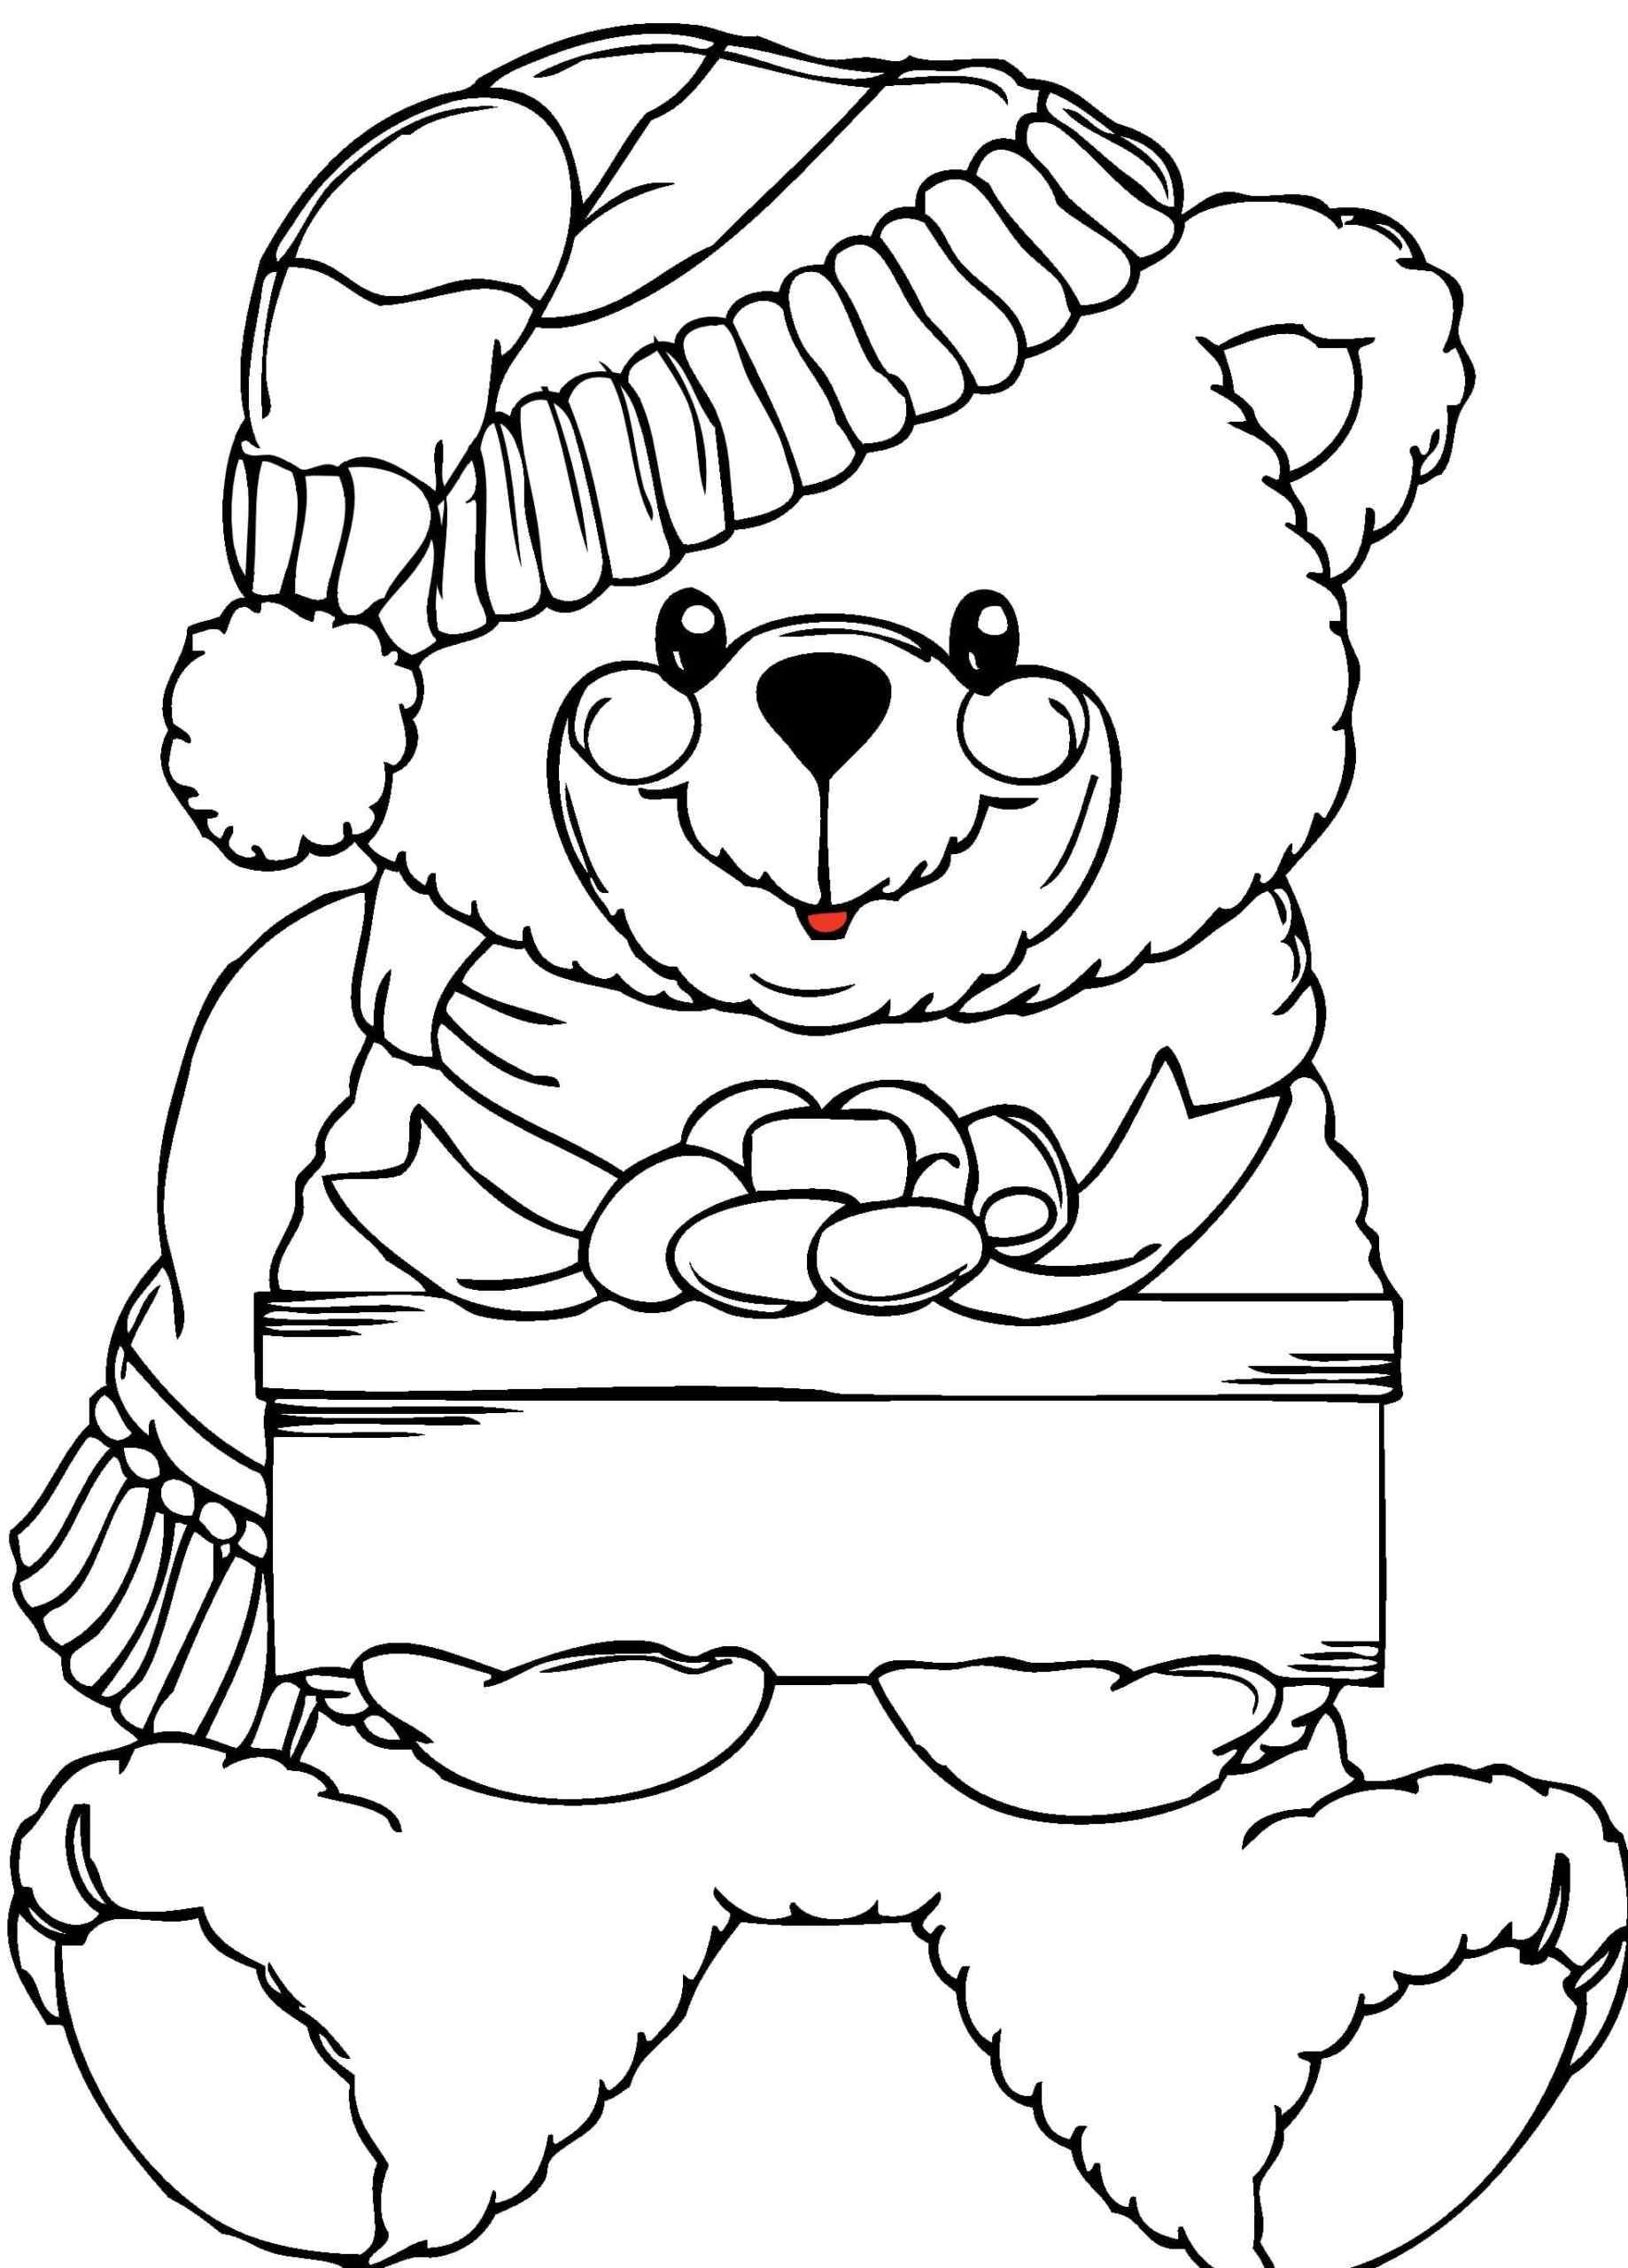 Teddy Bear Giving A Gift Coloring Page